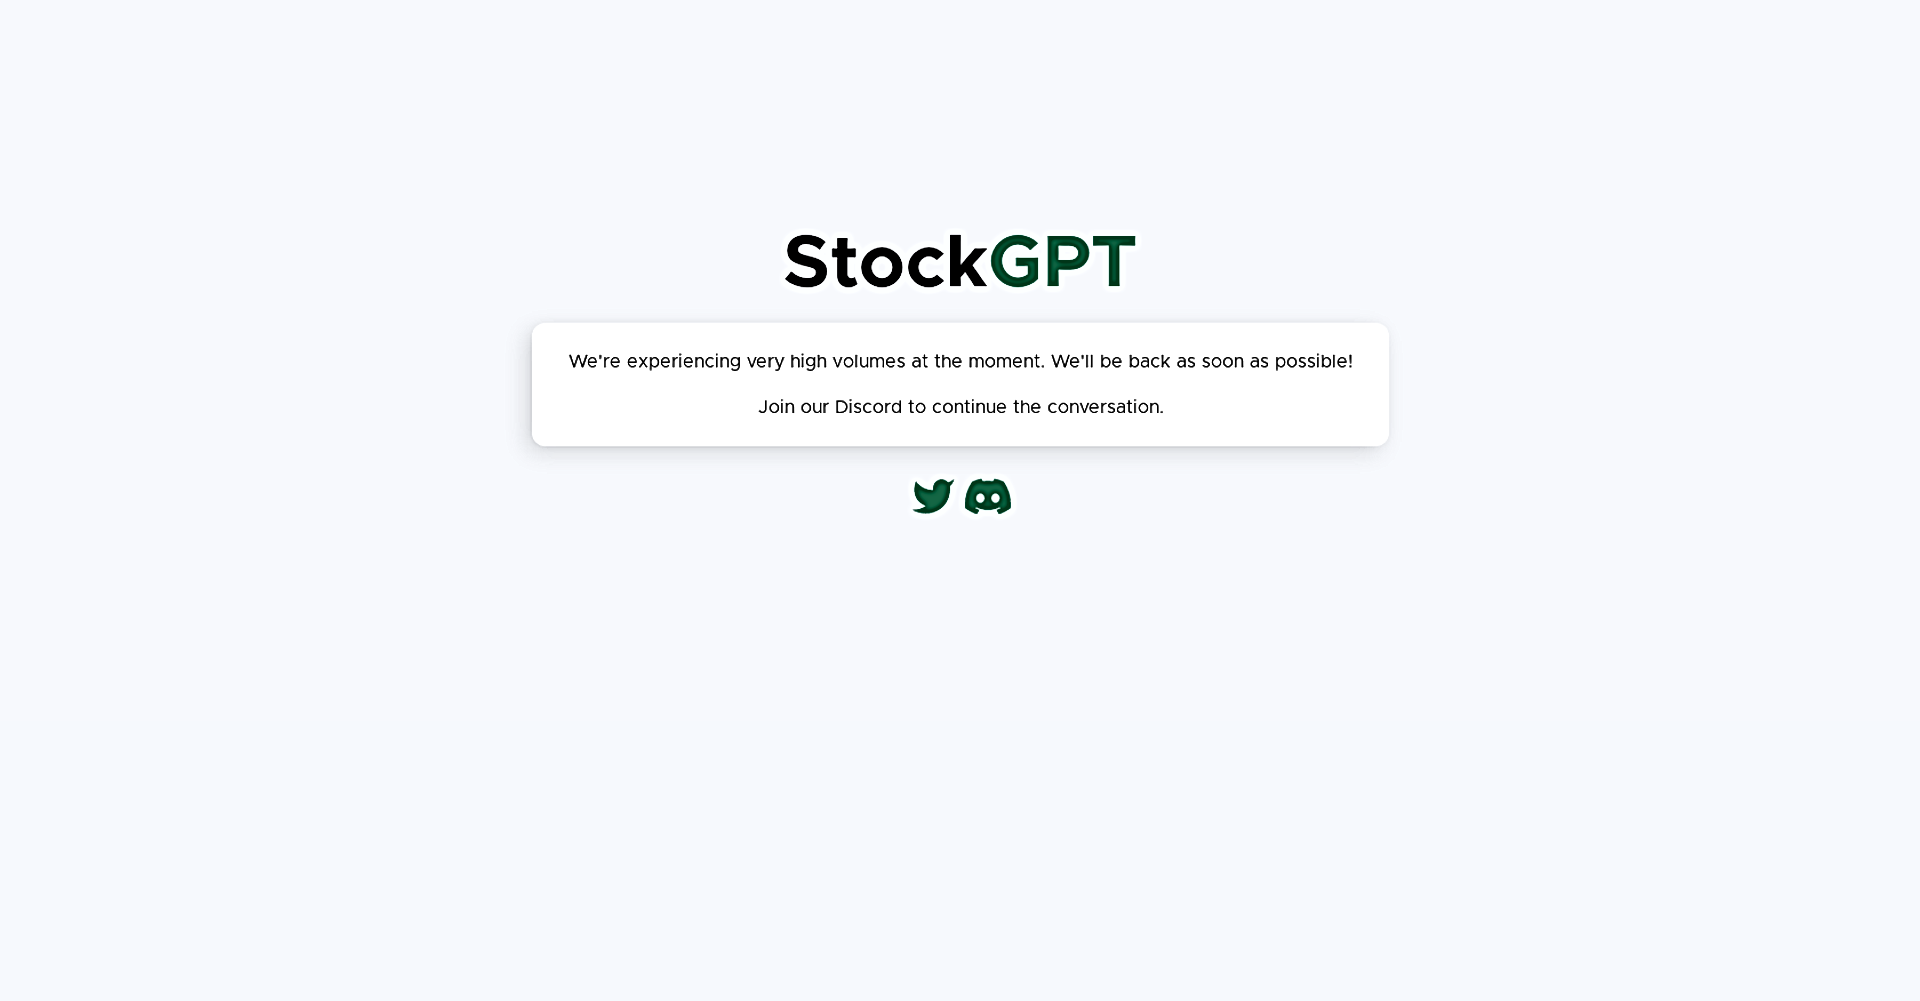 StockGPT featured